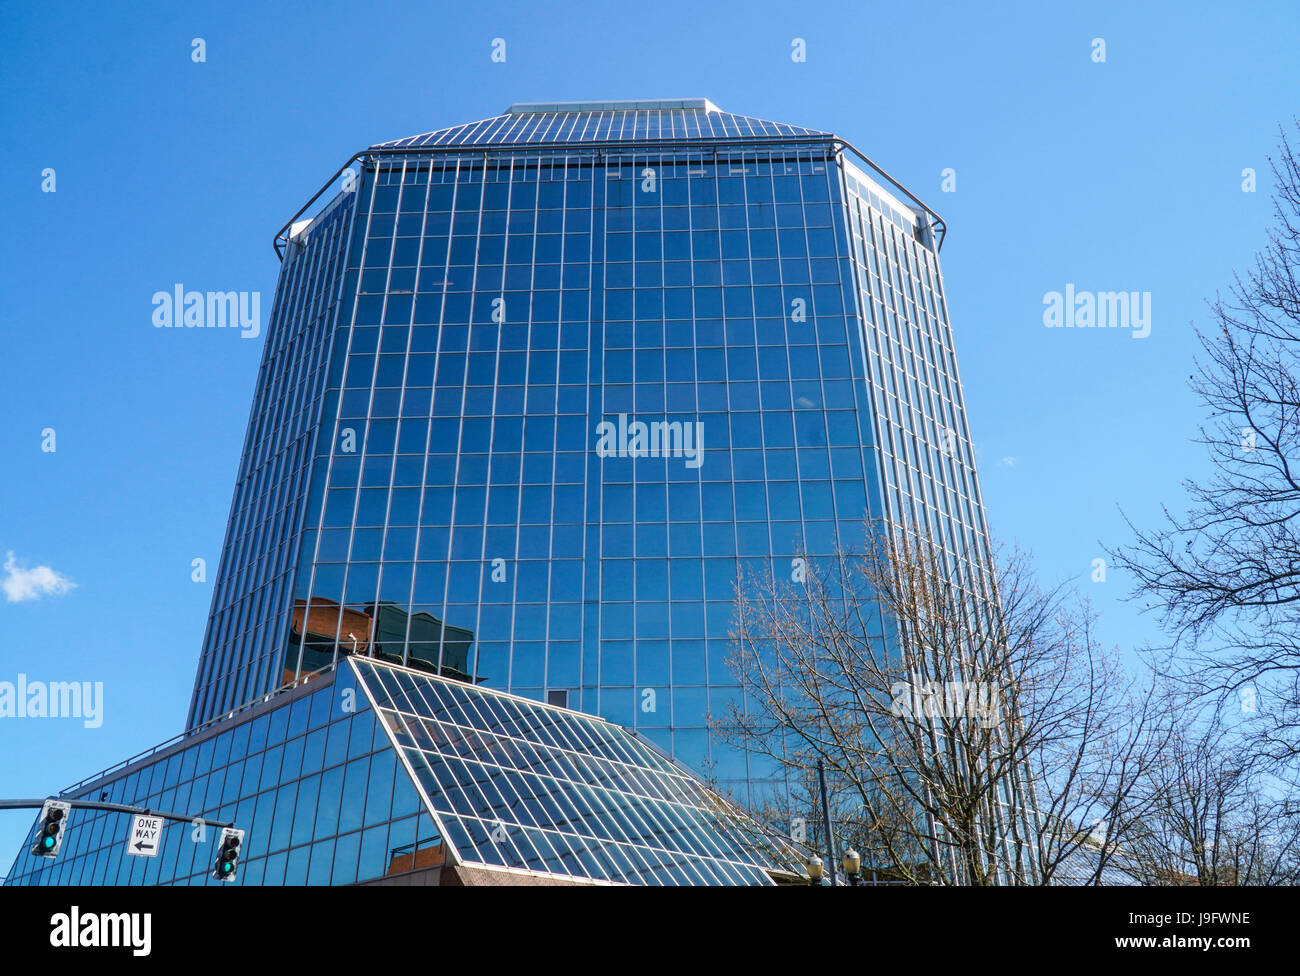 220 NW 2nd Ave building in Portland - PORTLAND - OREGON - APRIL 16, 2017 Stock Photo